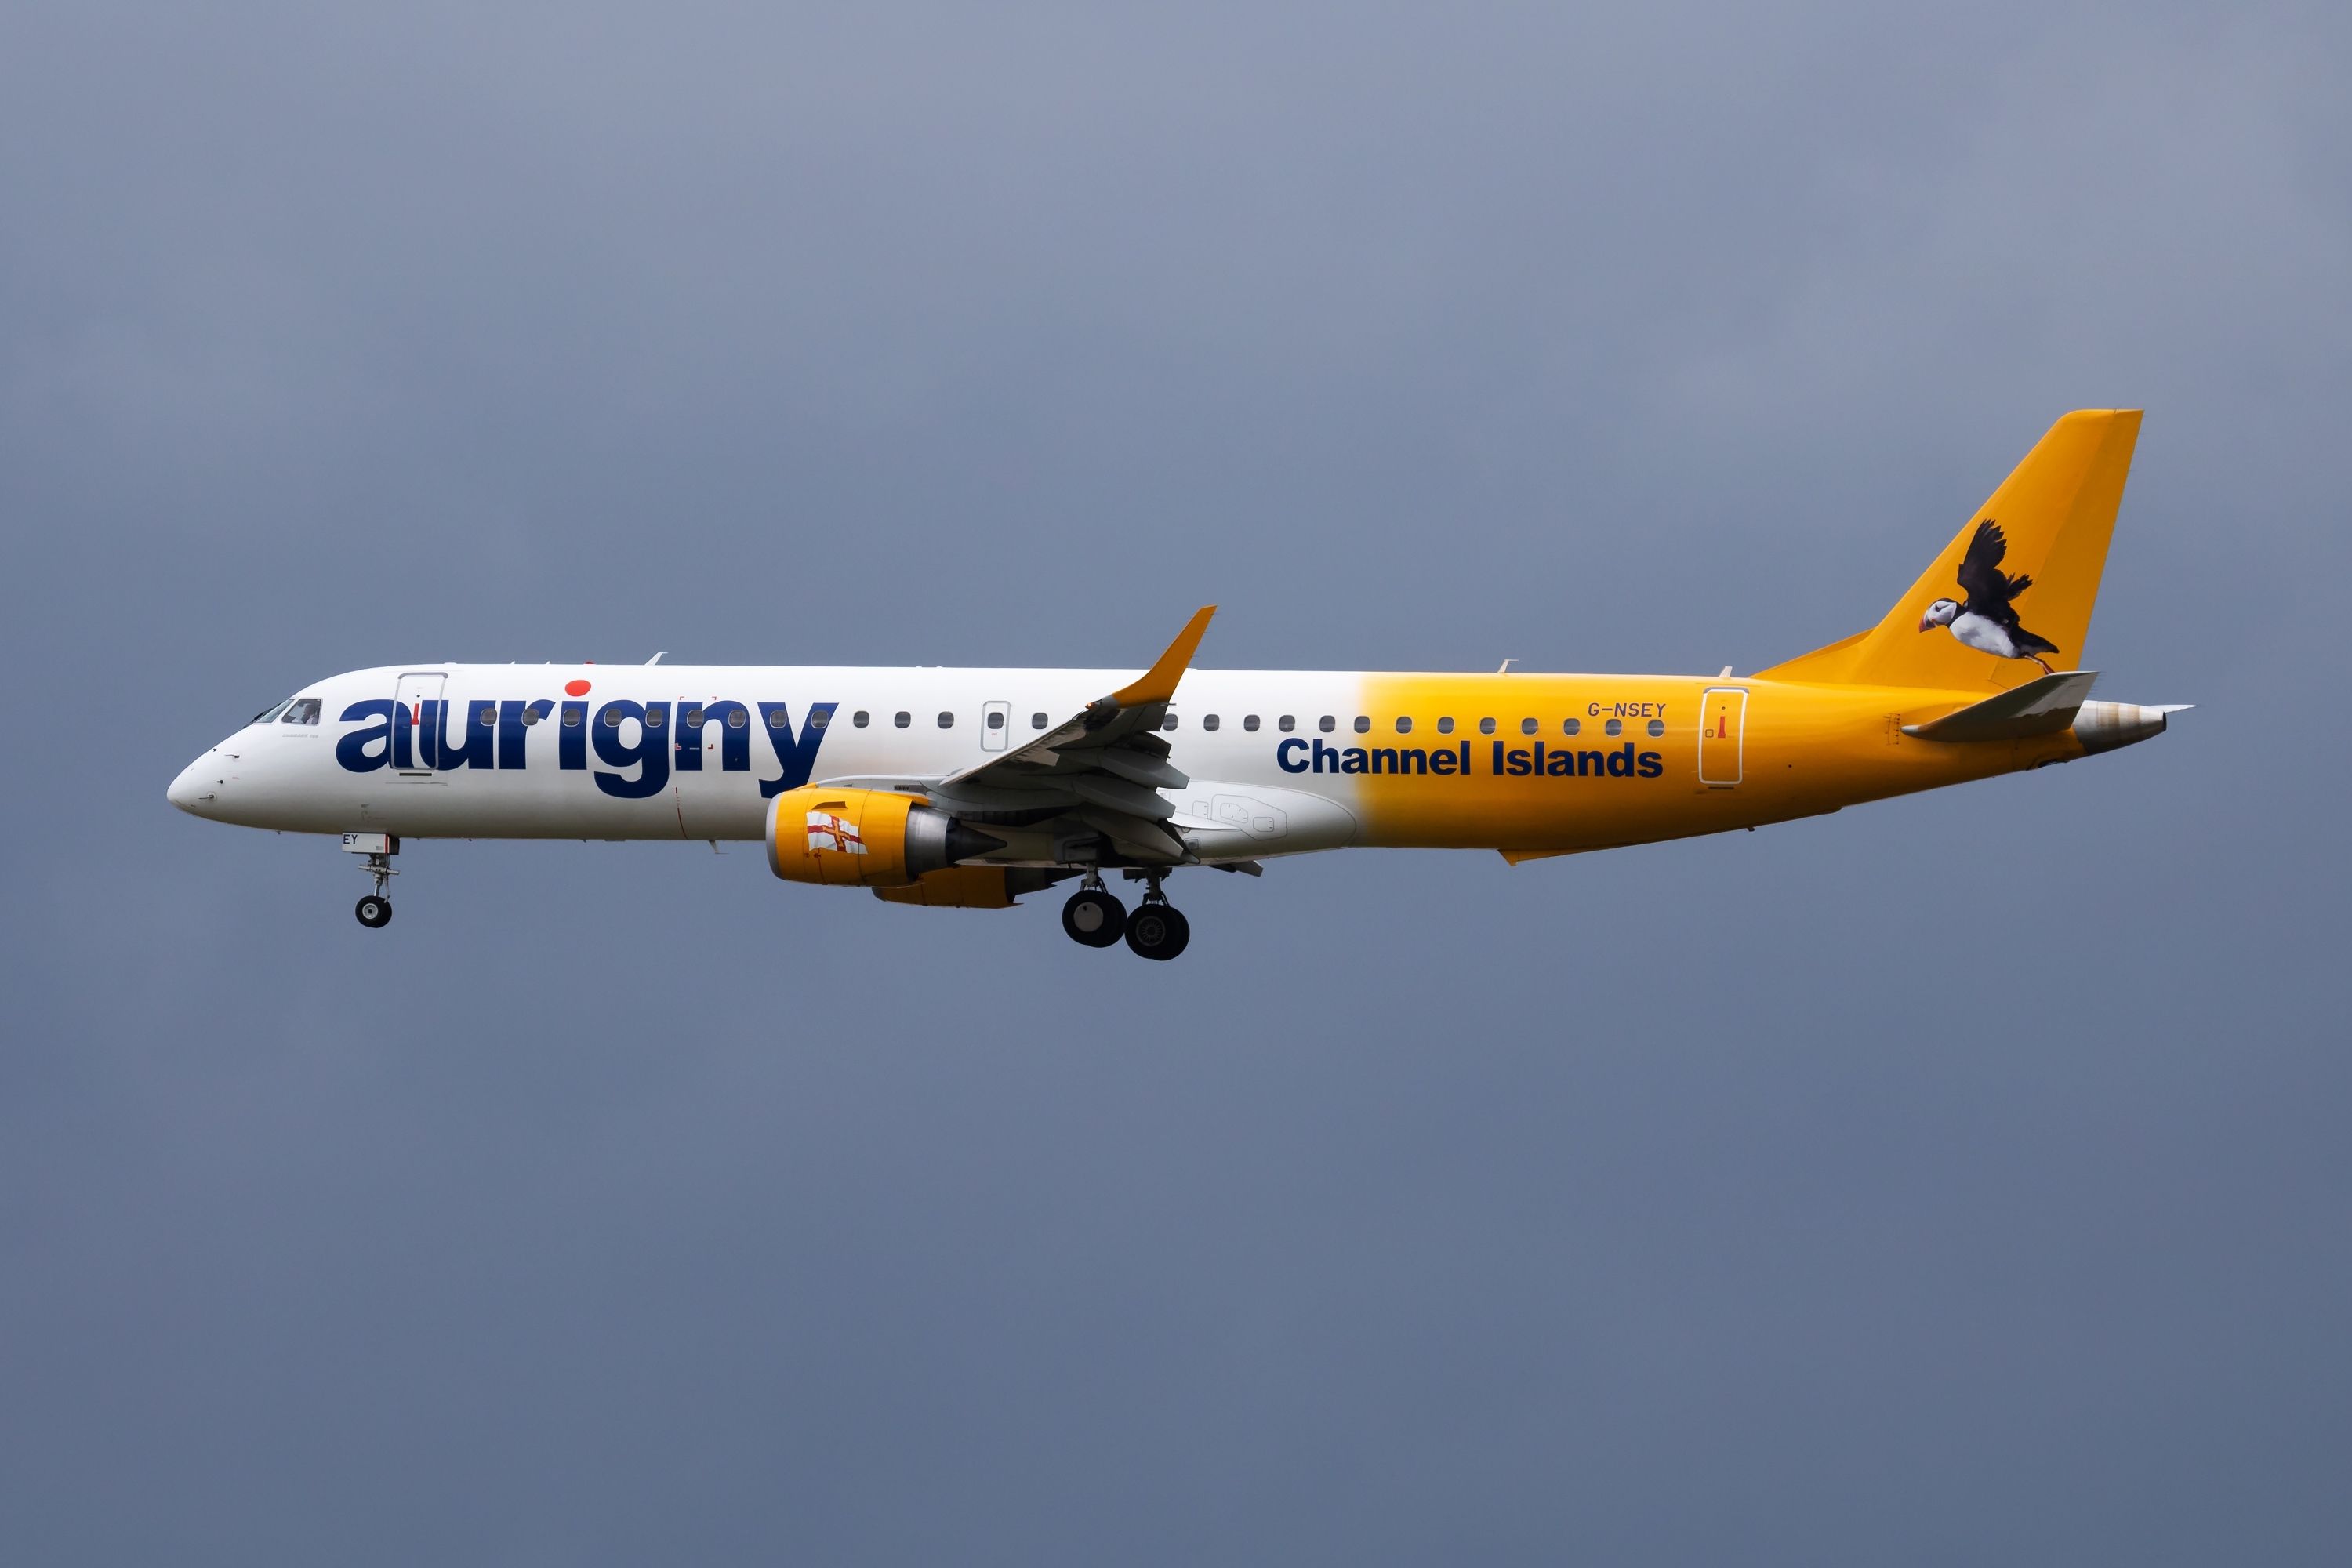 Aurigny Air's Embraer jet, flying below the clouds.